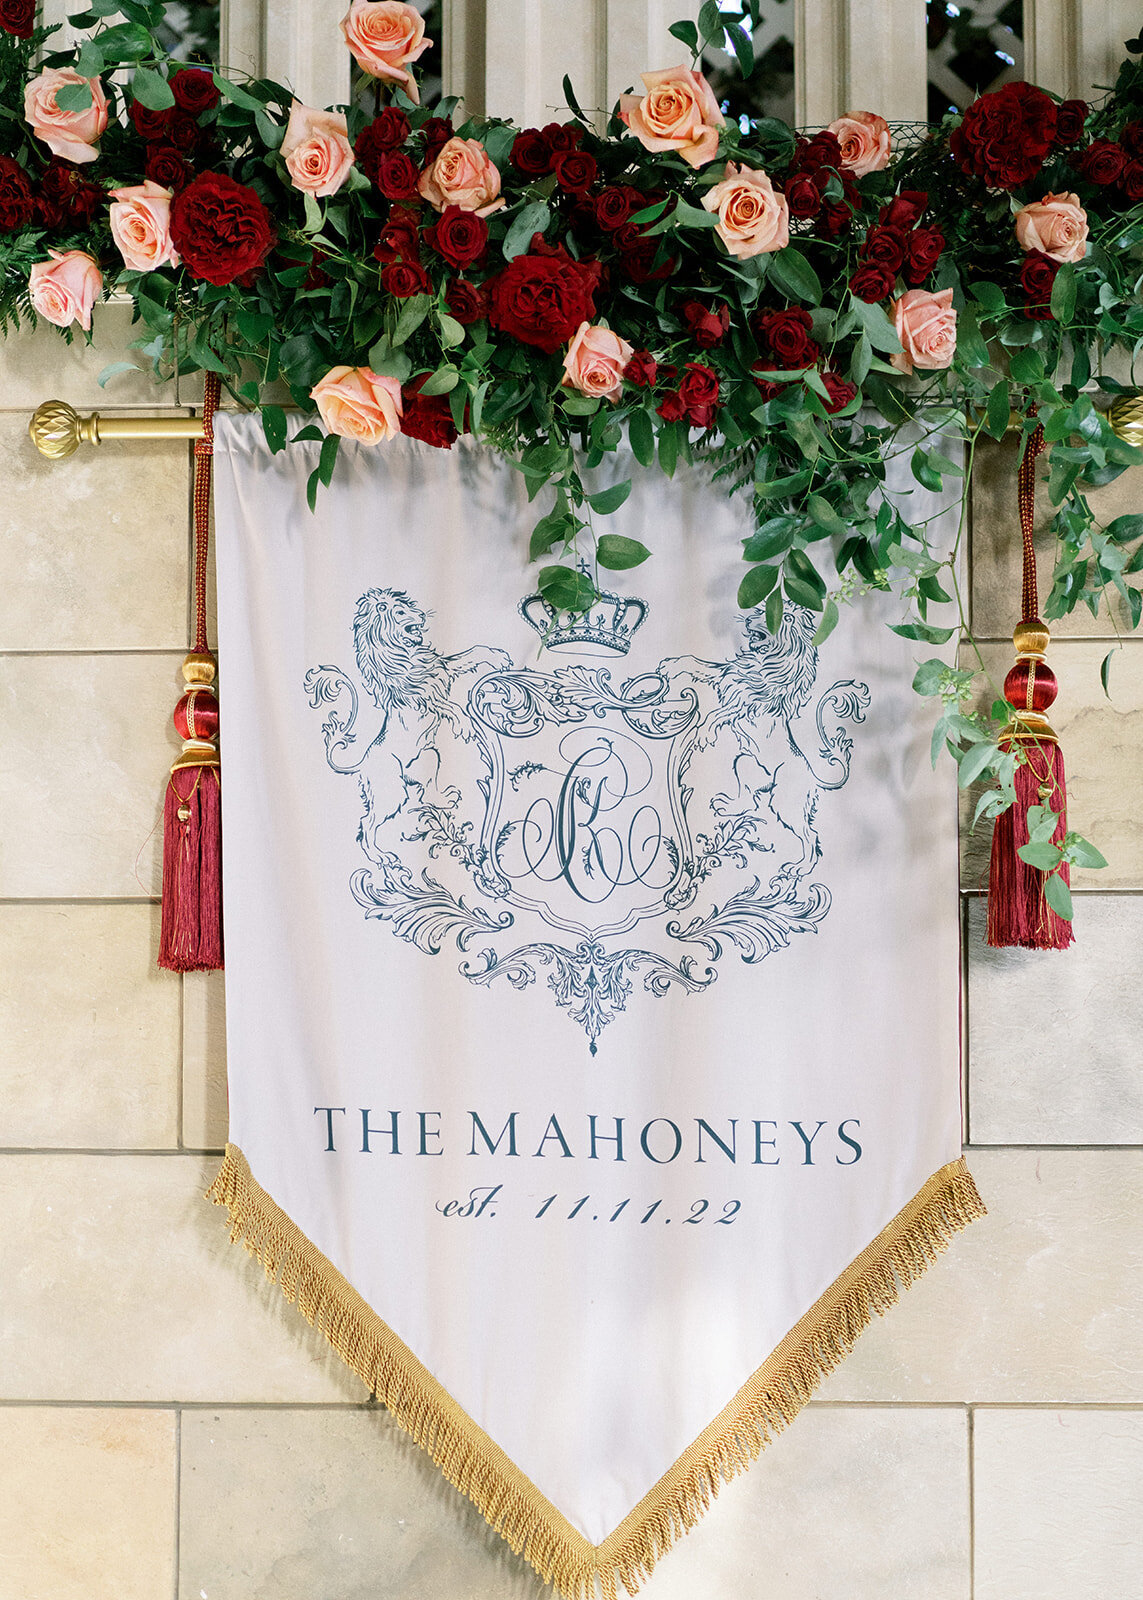 Custom crest banner hanged to the wall with florals